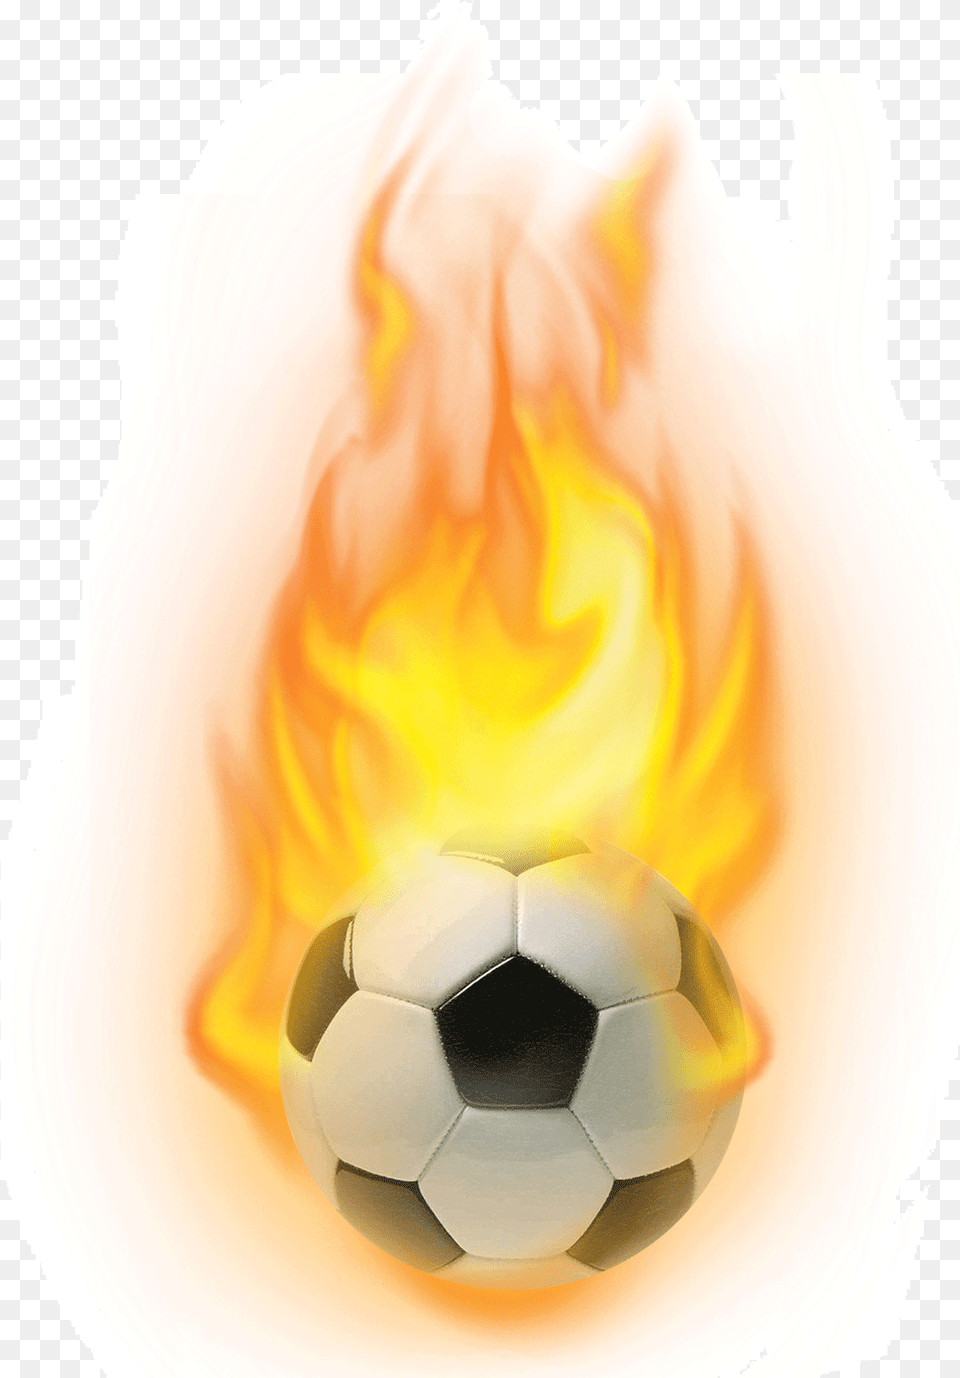 Still Life Photography, Ball, Football, Soccer, Soccer Ball Free Png Download